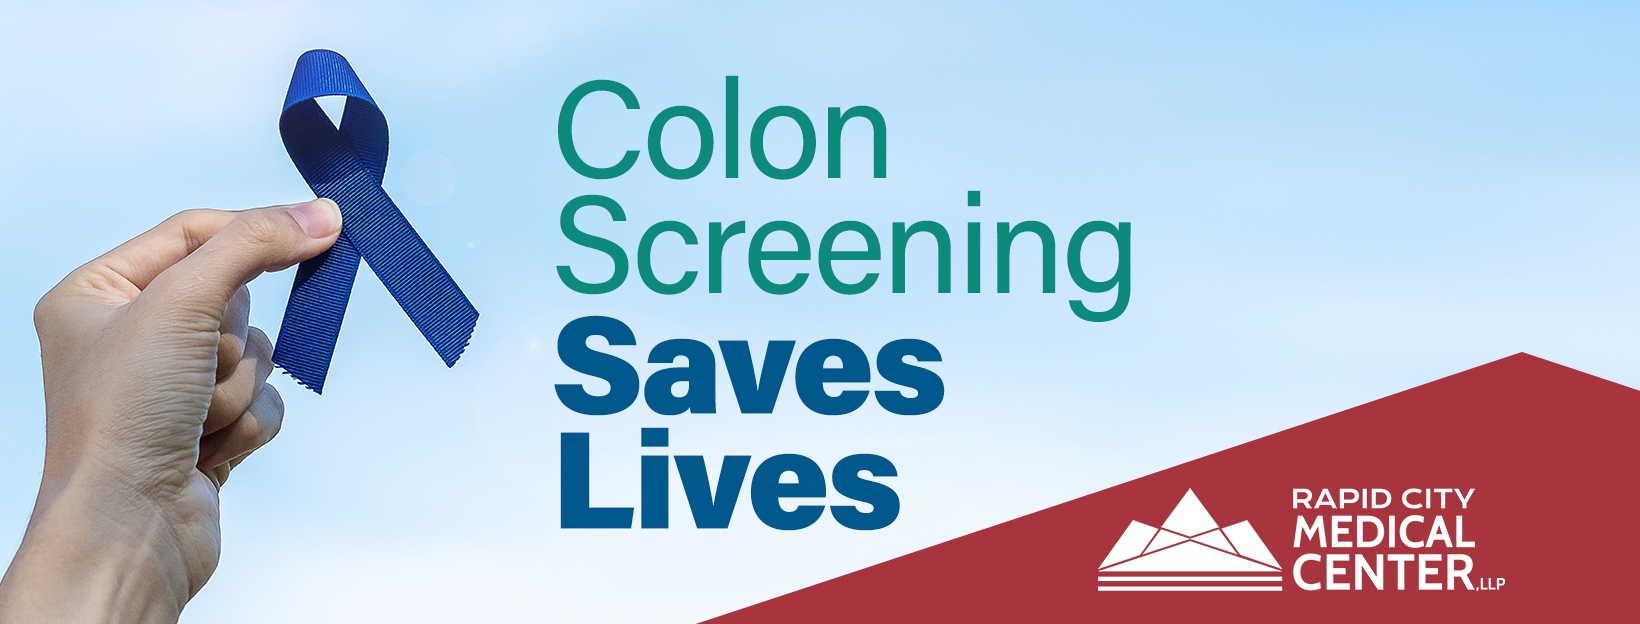 Rapid City Medical Center’s Team of Board-Certified Gastroenterologists Remind Community of Colon Cancer Awareness and the Importance of Preventive Screening